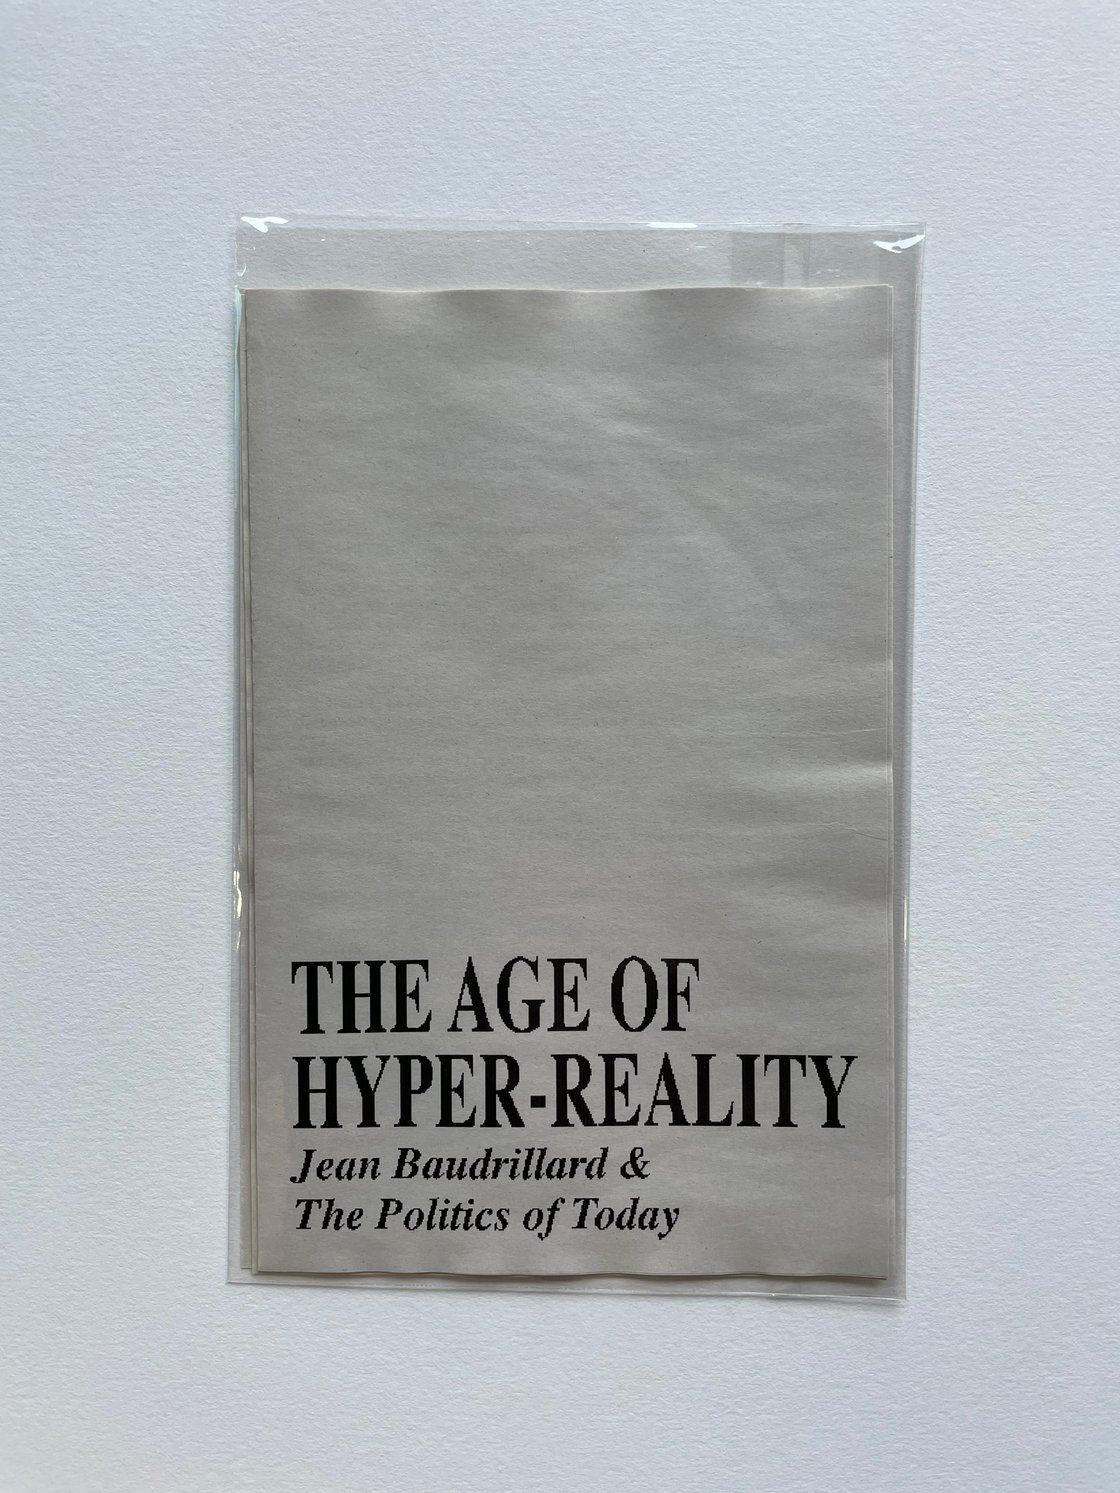 Image of The Age of Hyper-Reality